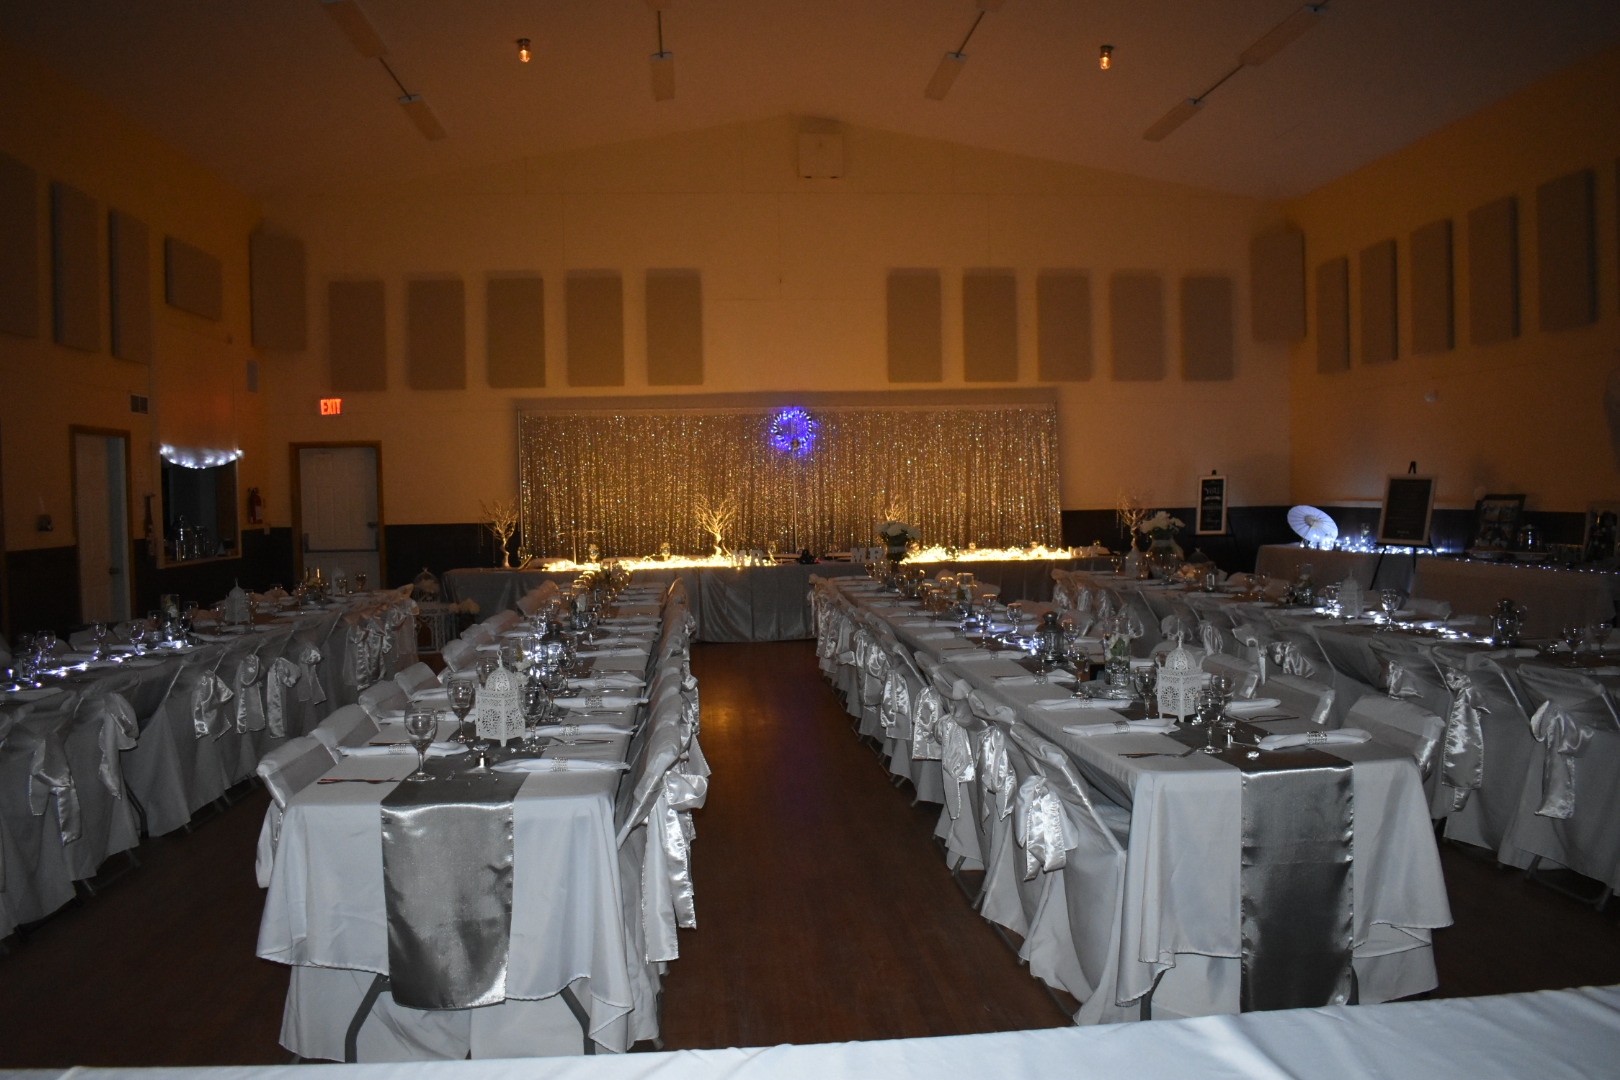 Hall interior decorated for wedding